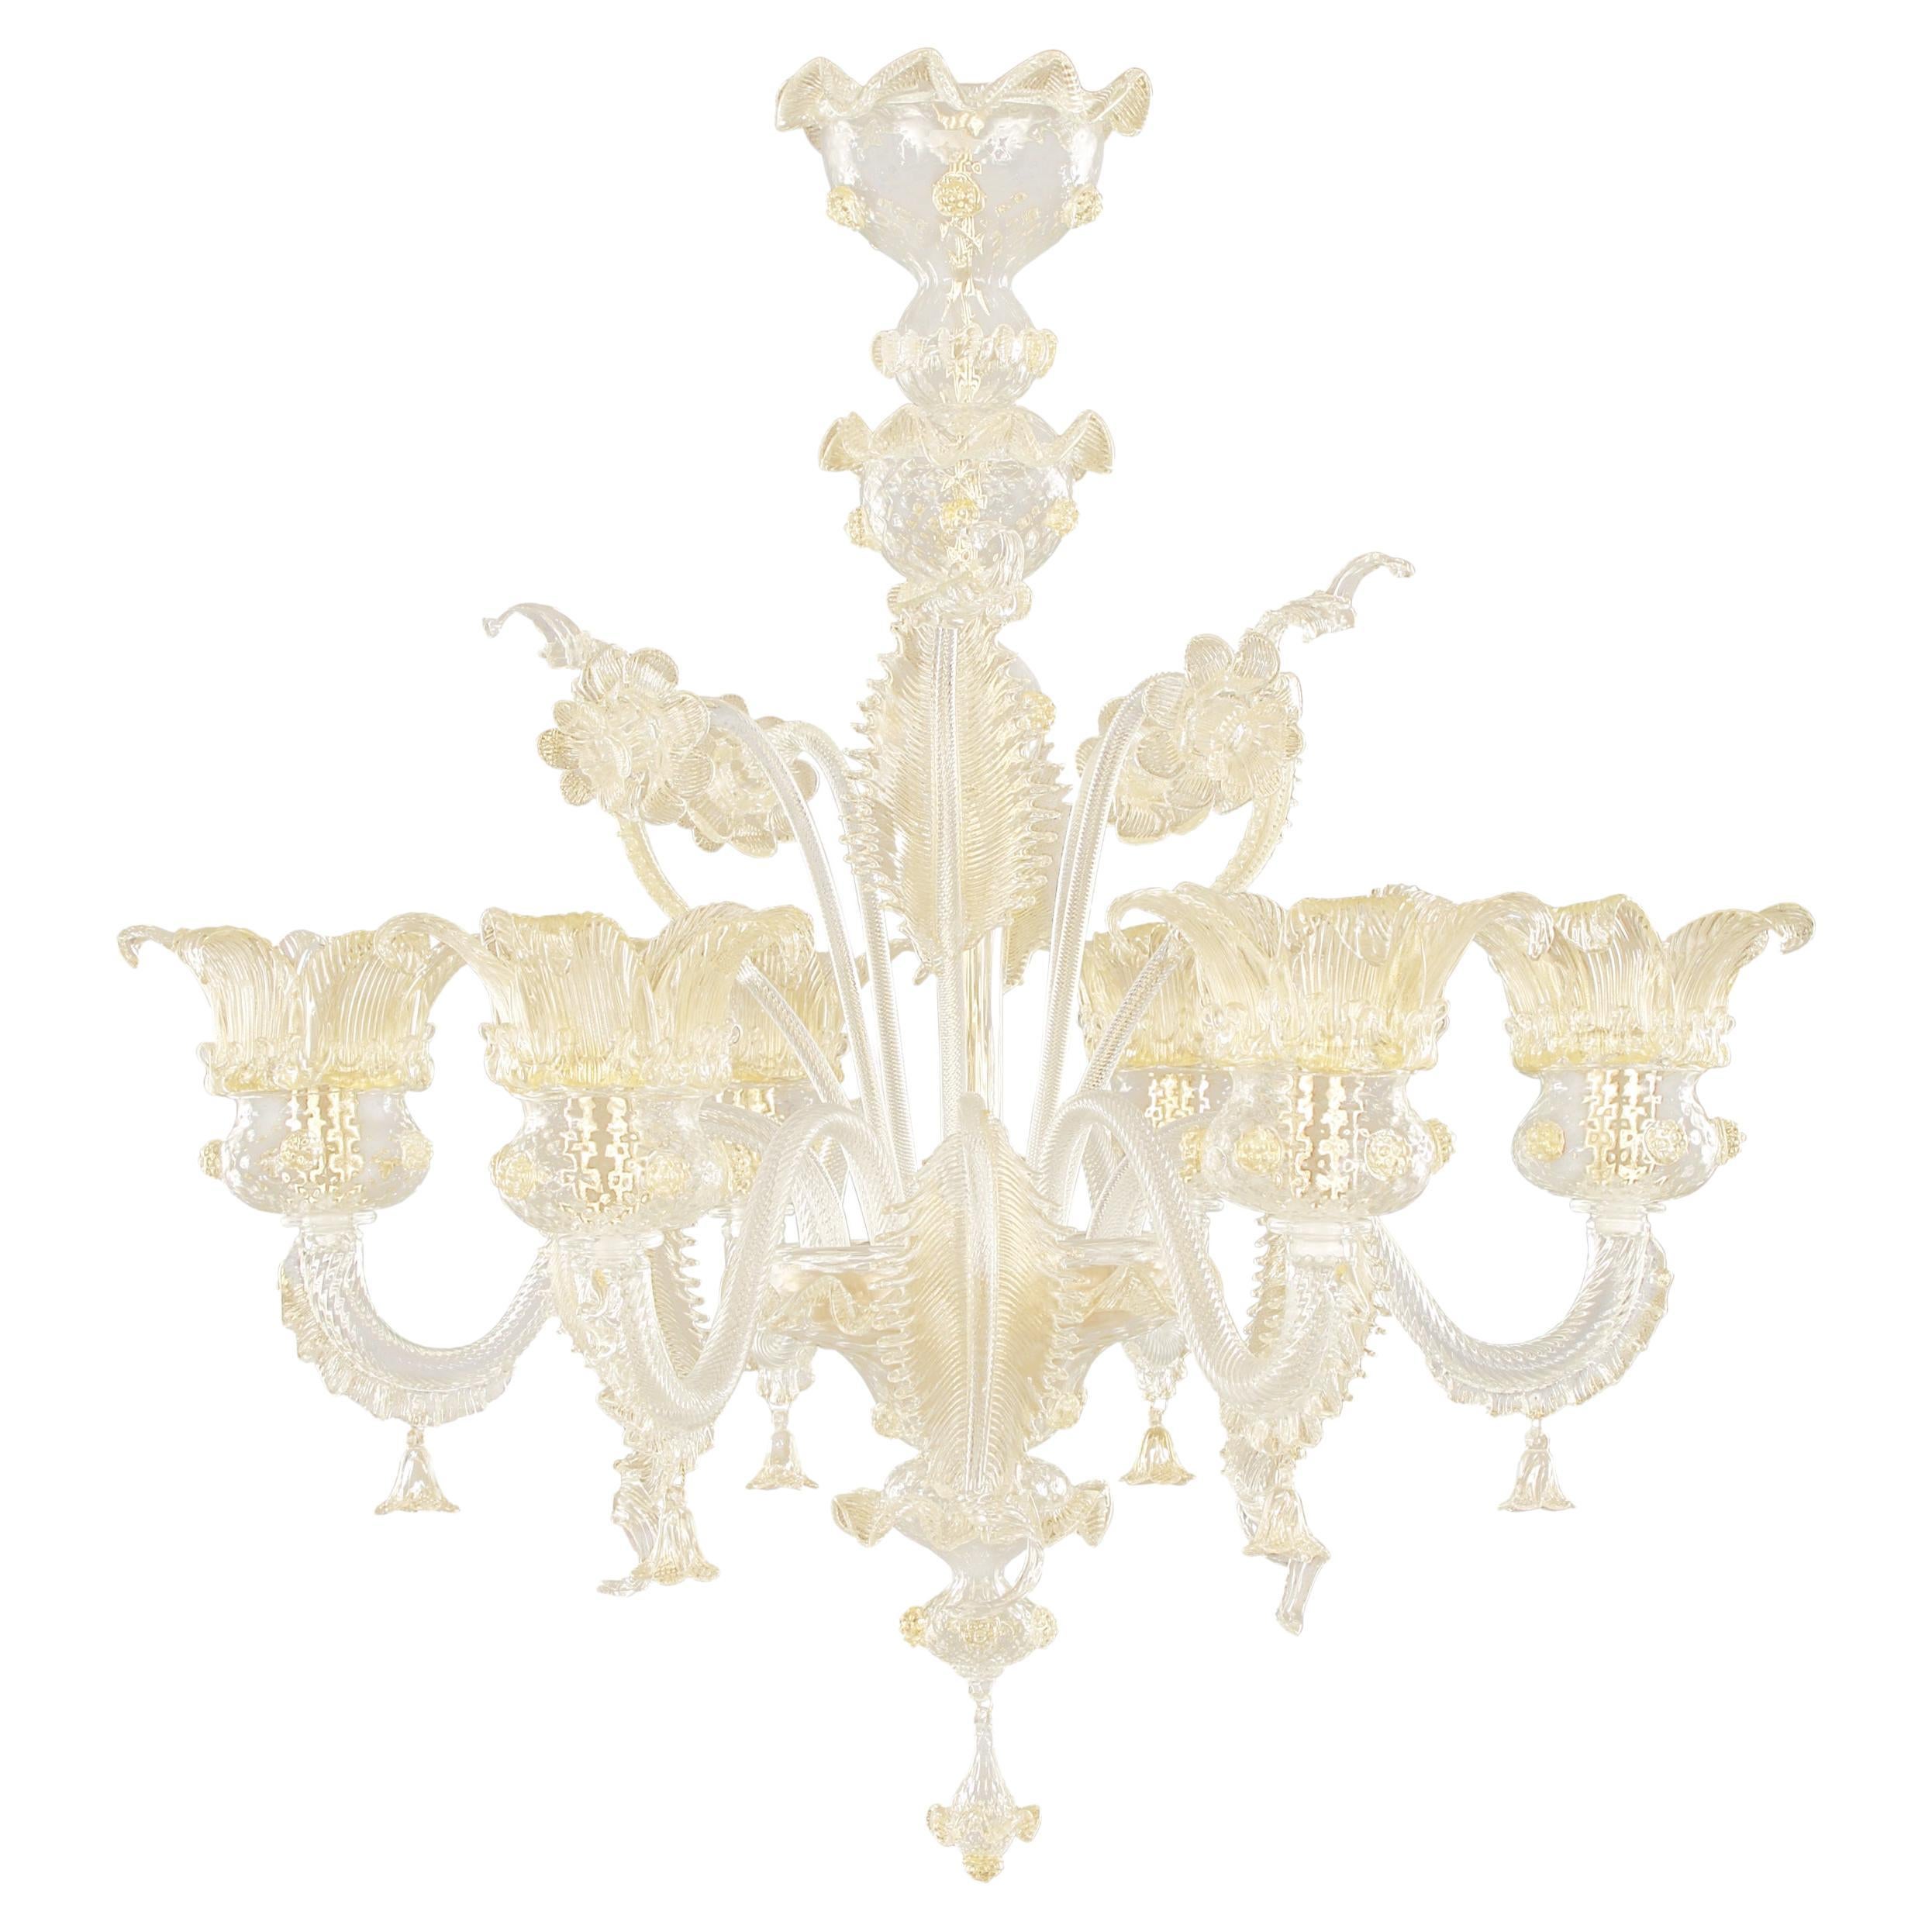 Luxury Chandelier 6 Arms Clear Murano Glass Gold Details by Multiforme